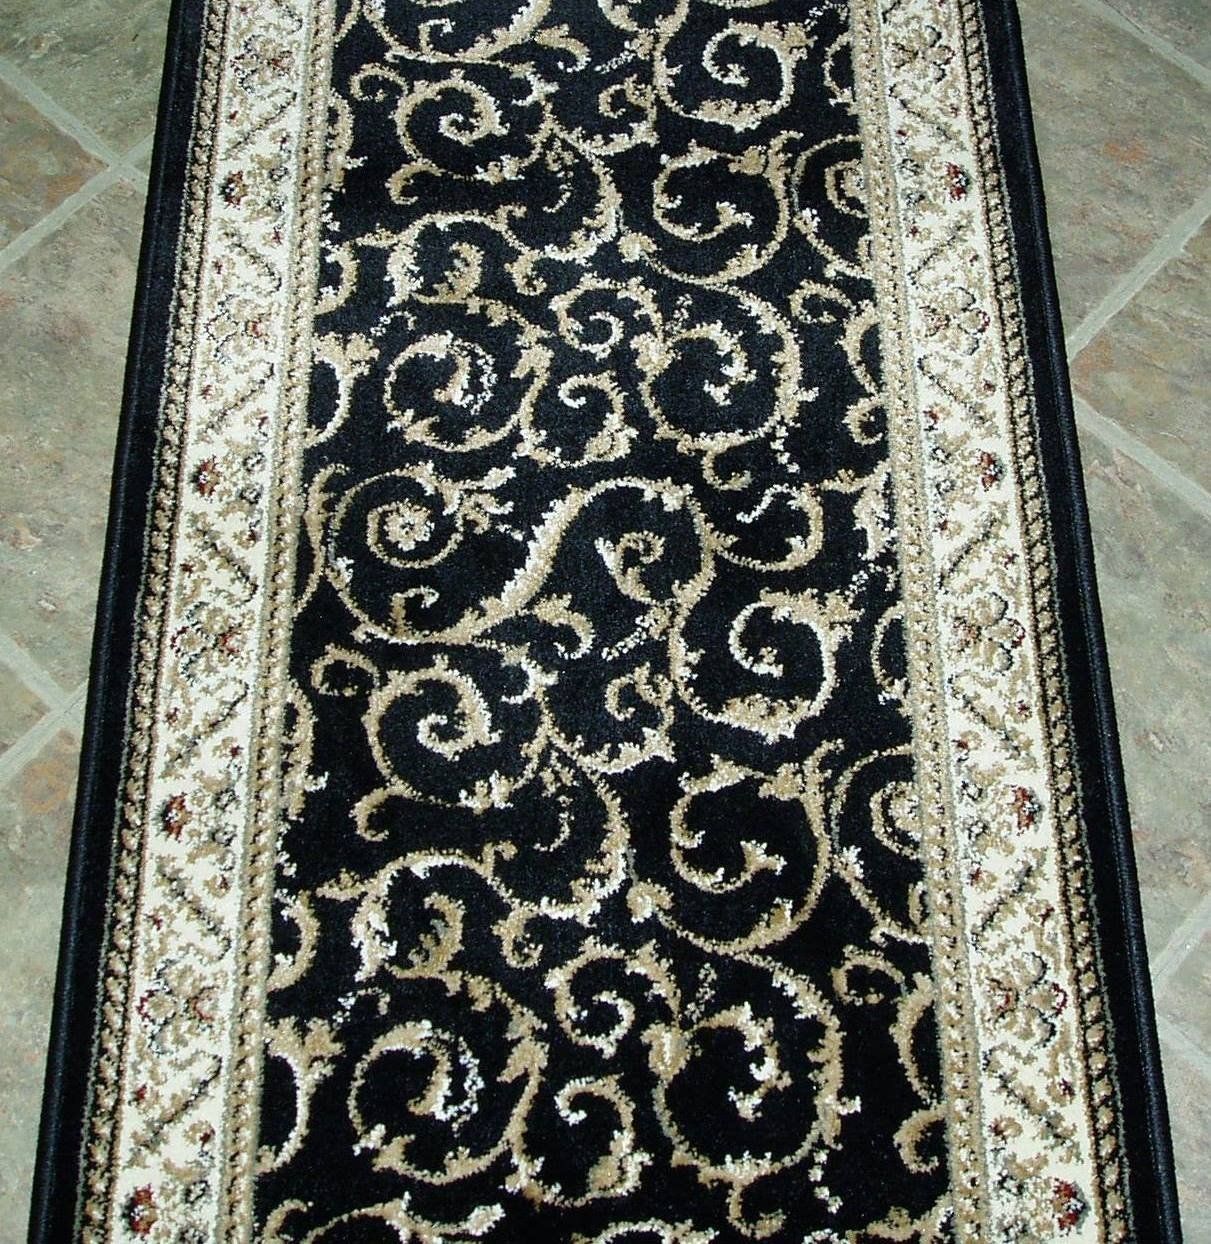 Interior Short Black And White Striped Hallway Runner Rugs With With Regard To Hallway Runners Black (Photo 6 of 20)